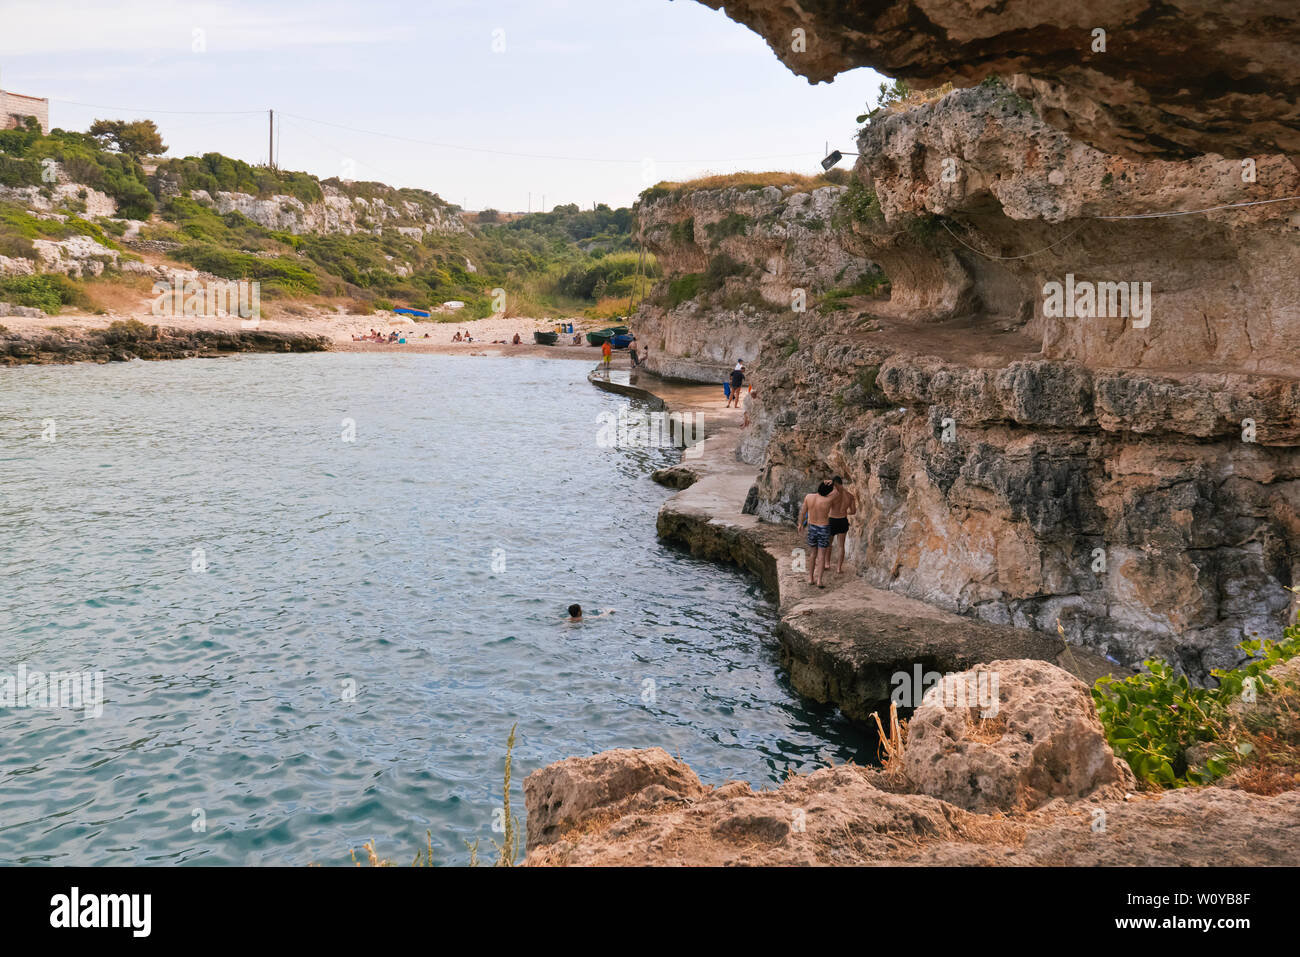 Harbor beach with unrecognizable people far away on the shore who take the relaxing time in the hot afternoon summer of climate mediterranean. Stock Photo